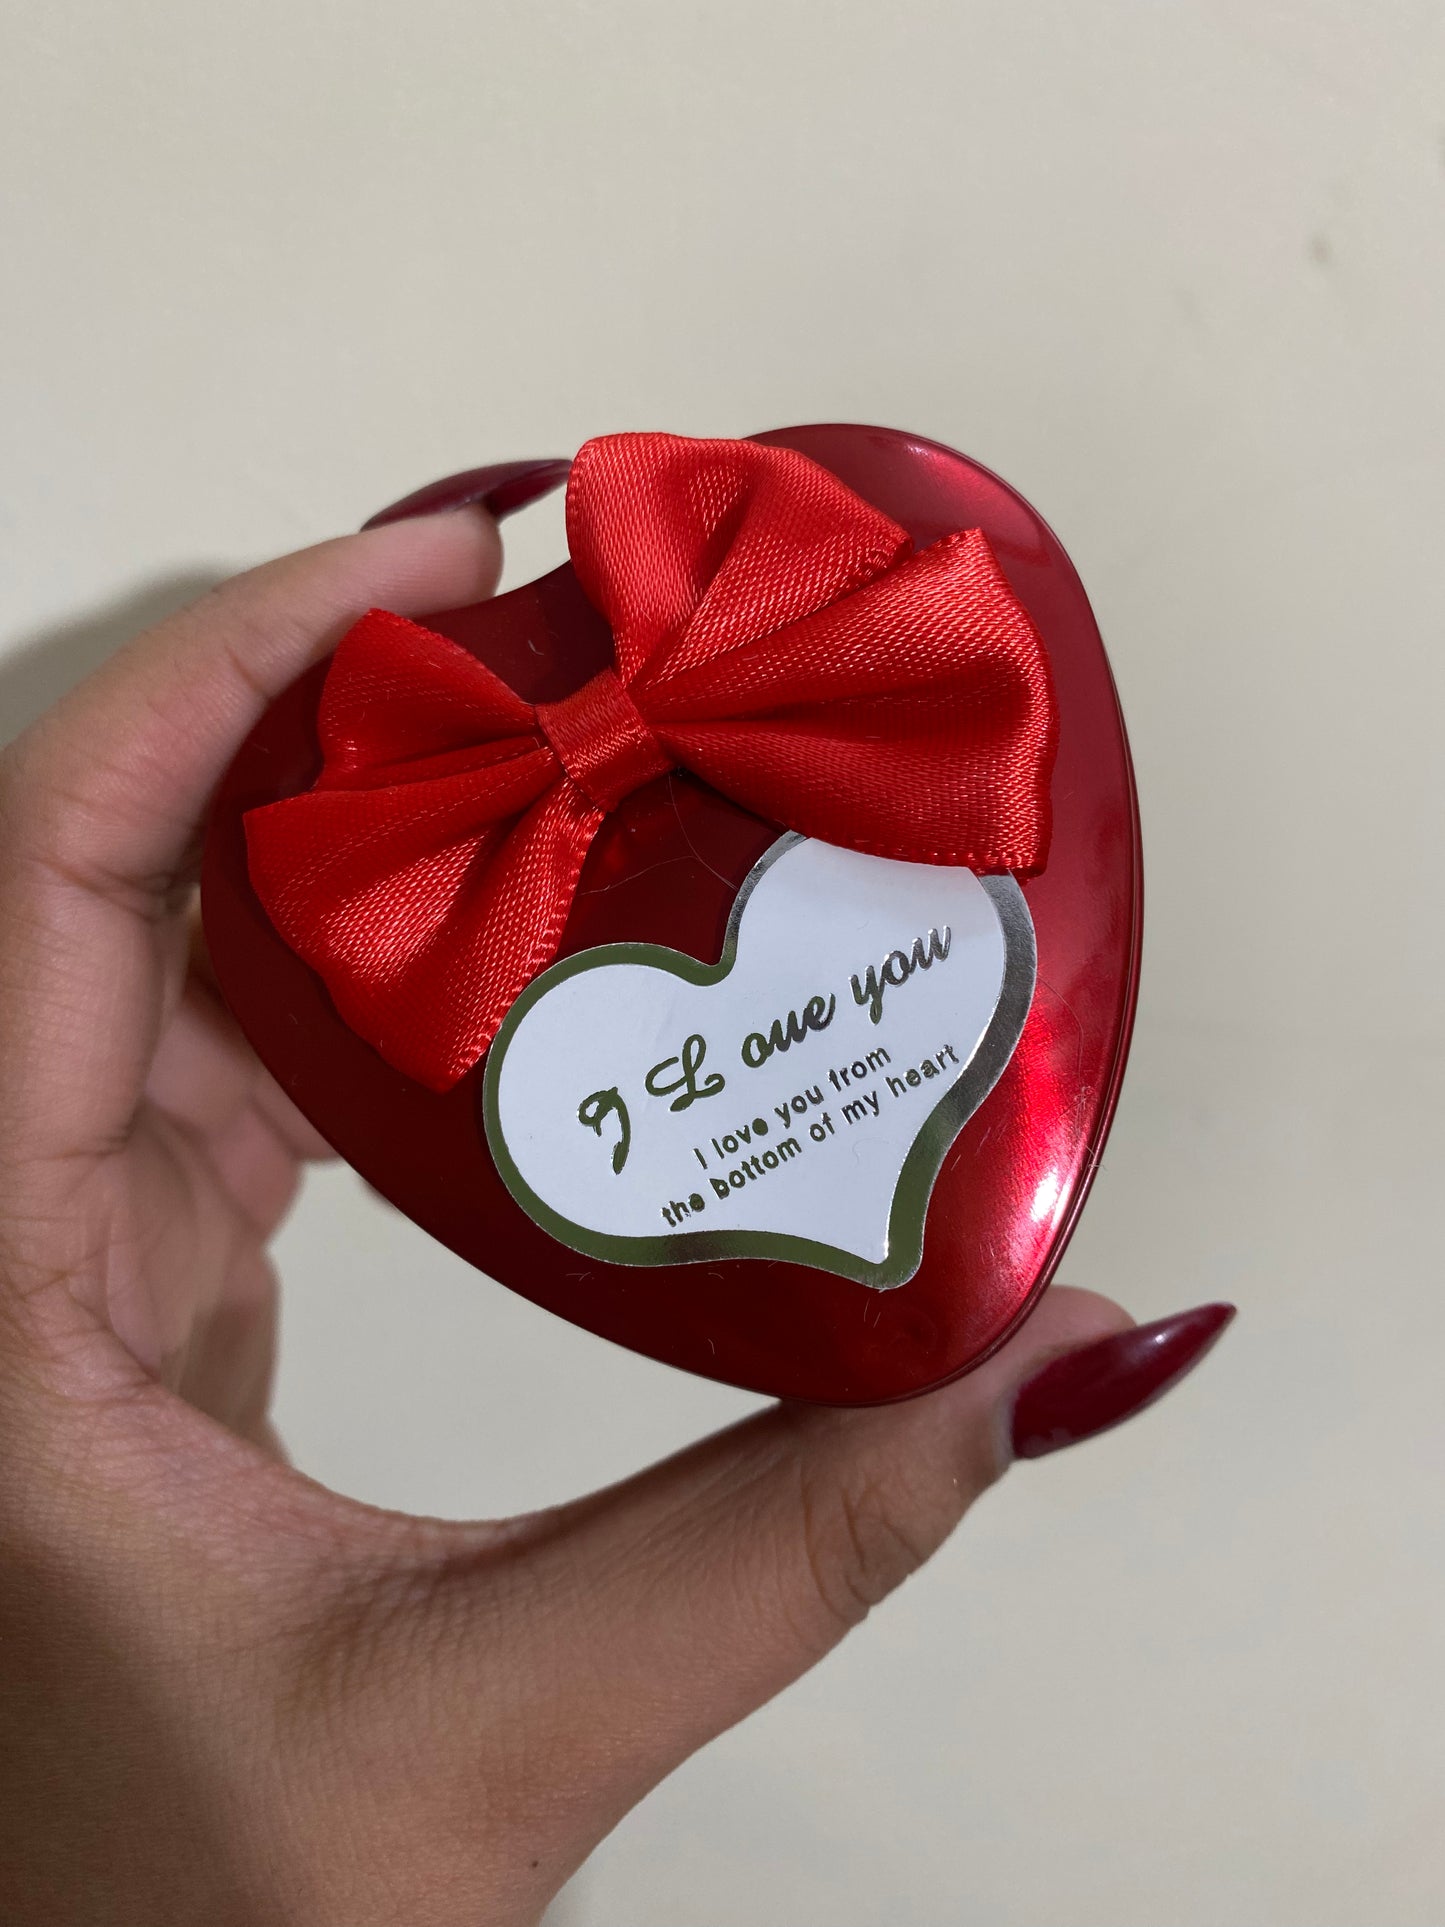 Mini Heart Shape Red Tin Gift Box And Teddy &  Fragrant Artificial Rose Bud Petal